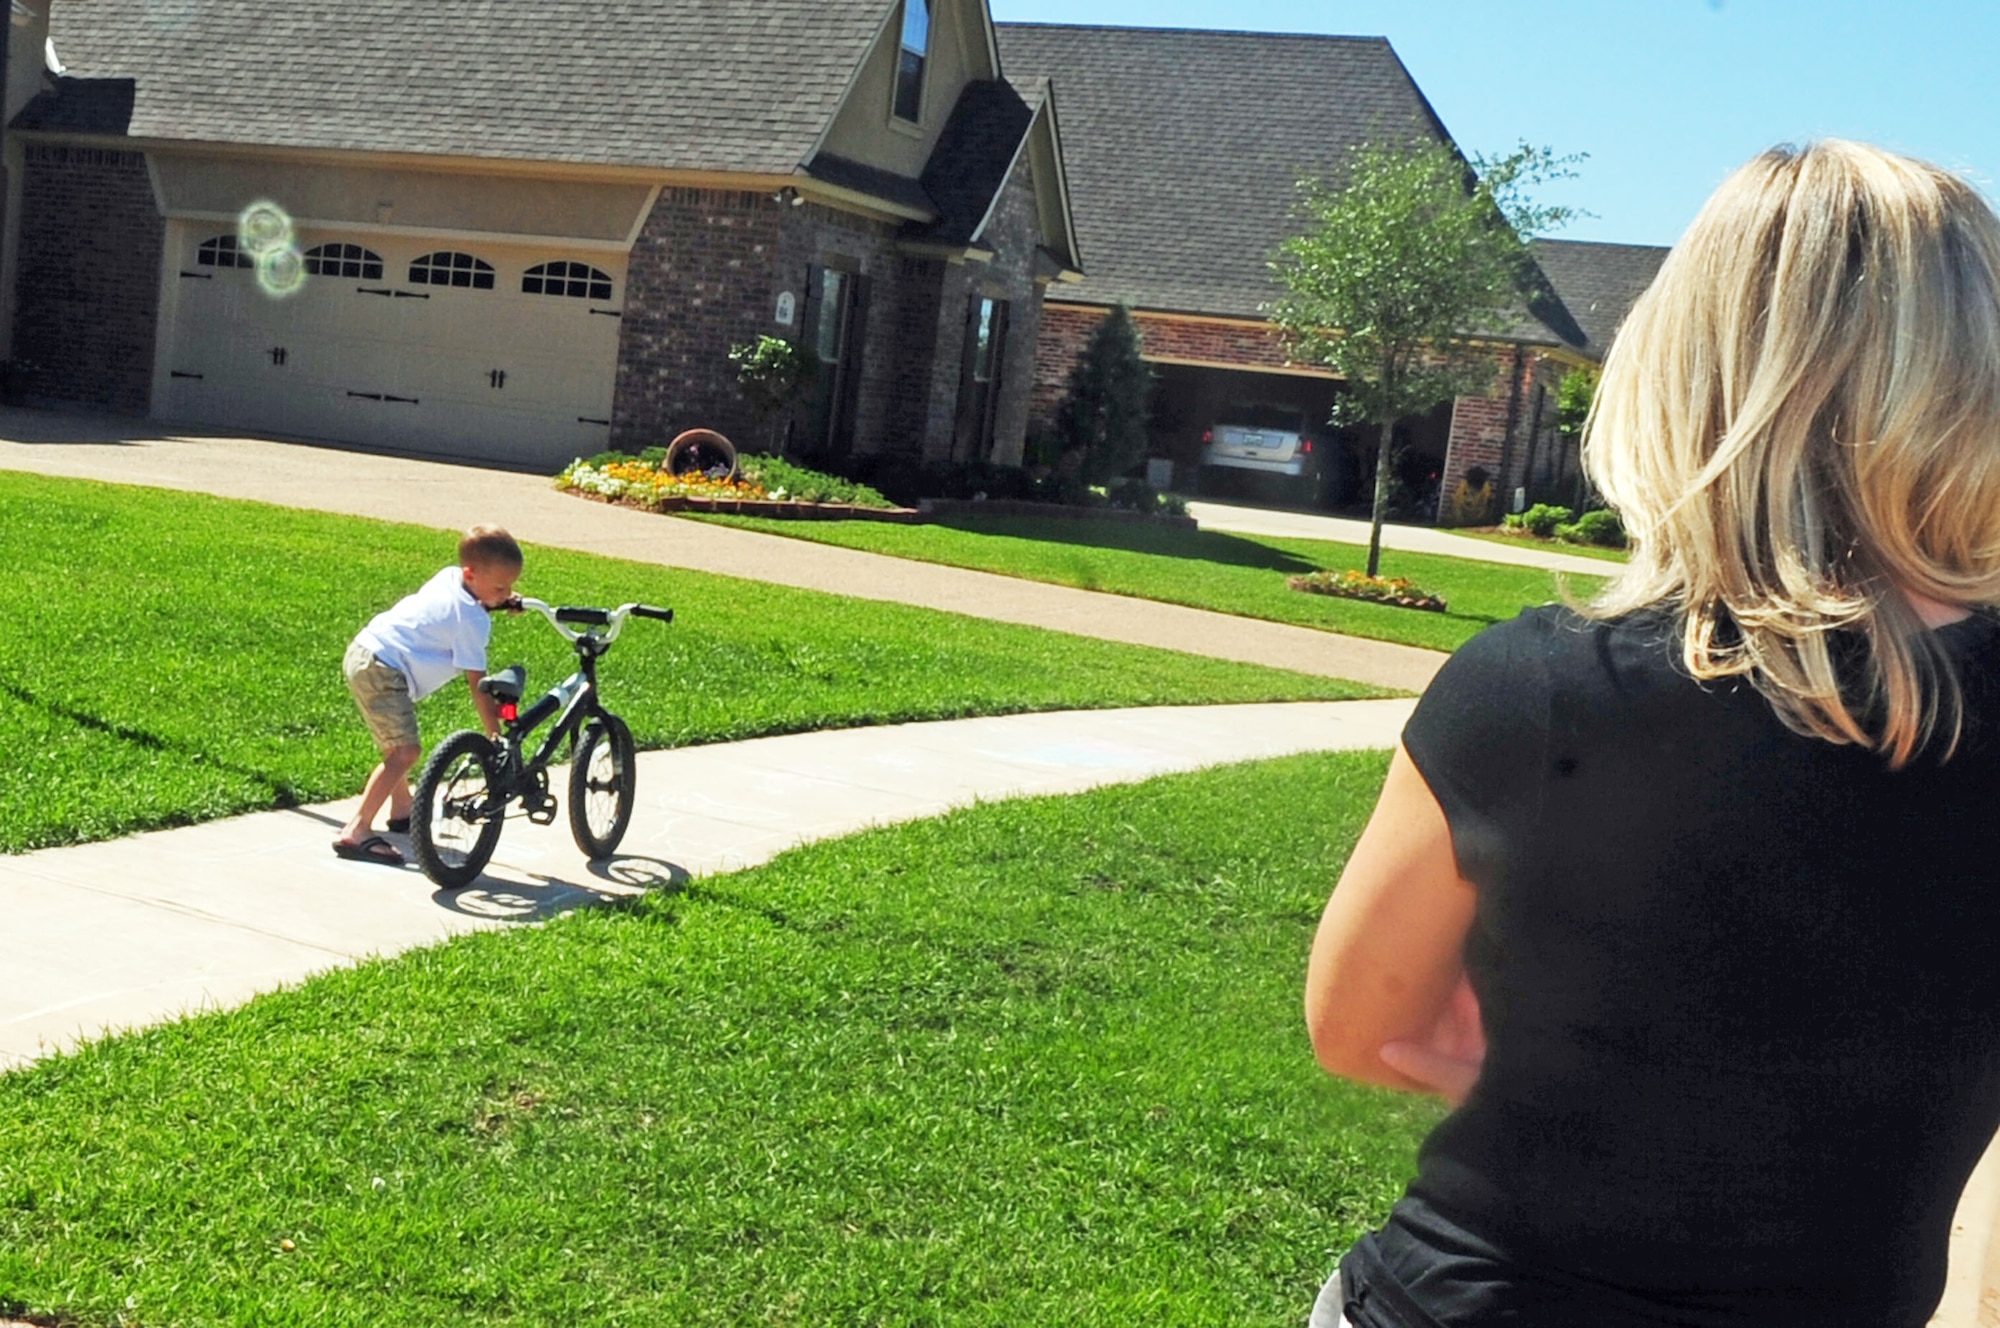 Mrs. Hilary Free, mother of three, watches her son, Will, 5, play with his bicycle outside their home in Shreveport, La., April 29. Mrs. Free stays home with her three children who help her with household chores, attend home school classes, assist with bible studies and other church activities and spend quality time playing outdoors together. (U.S. Air Force photo/Senior Airman Joanna M. Kresge) 